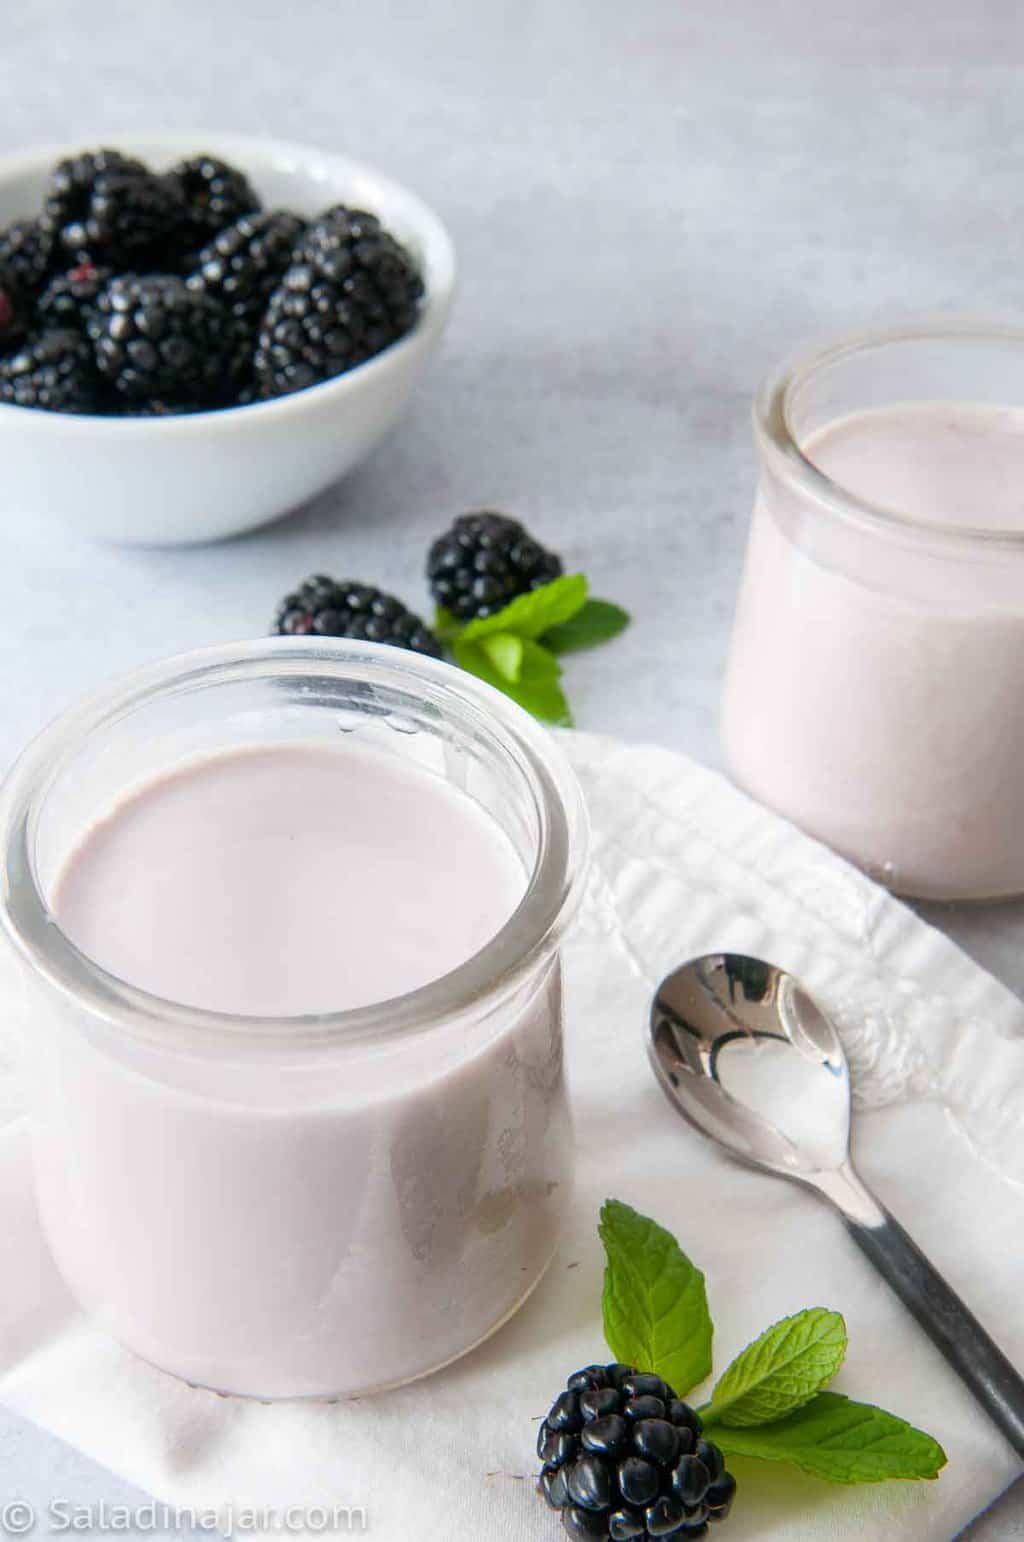 cold-start yogurt in jars with blackberries and mint